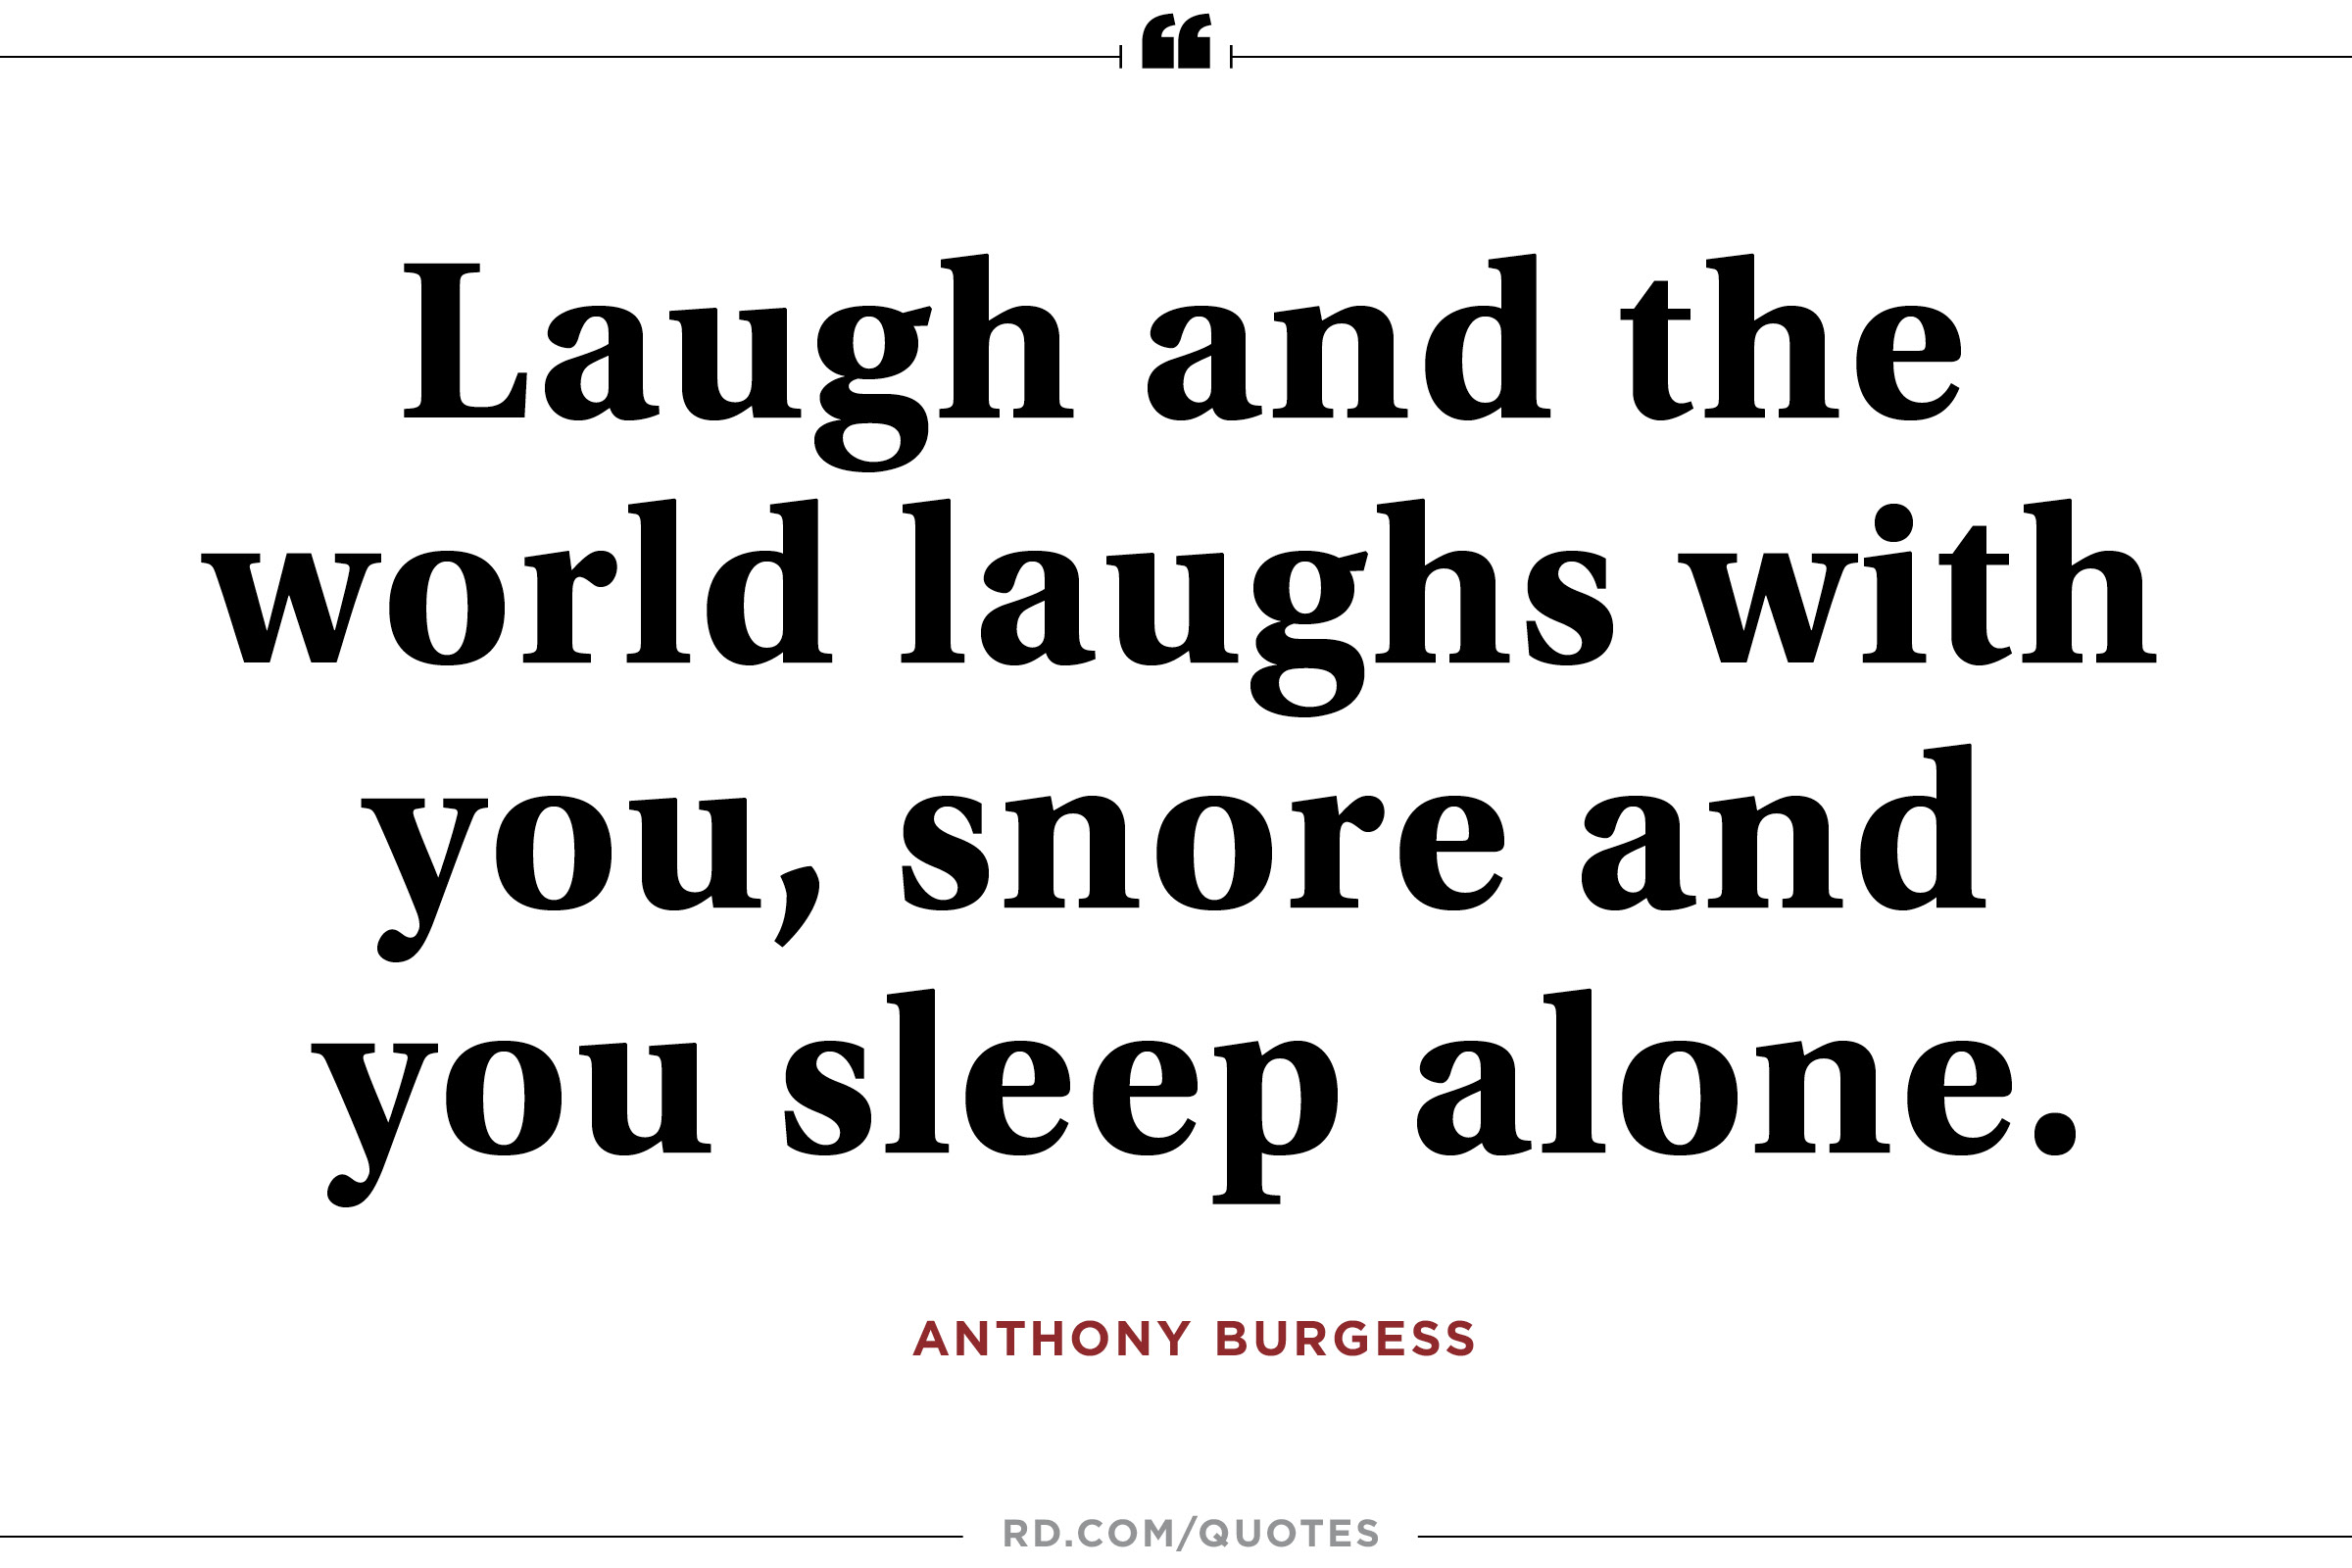 Laugh and the world laughs with you, snore and you sleep alone. Anthony Burgess